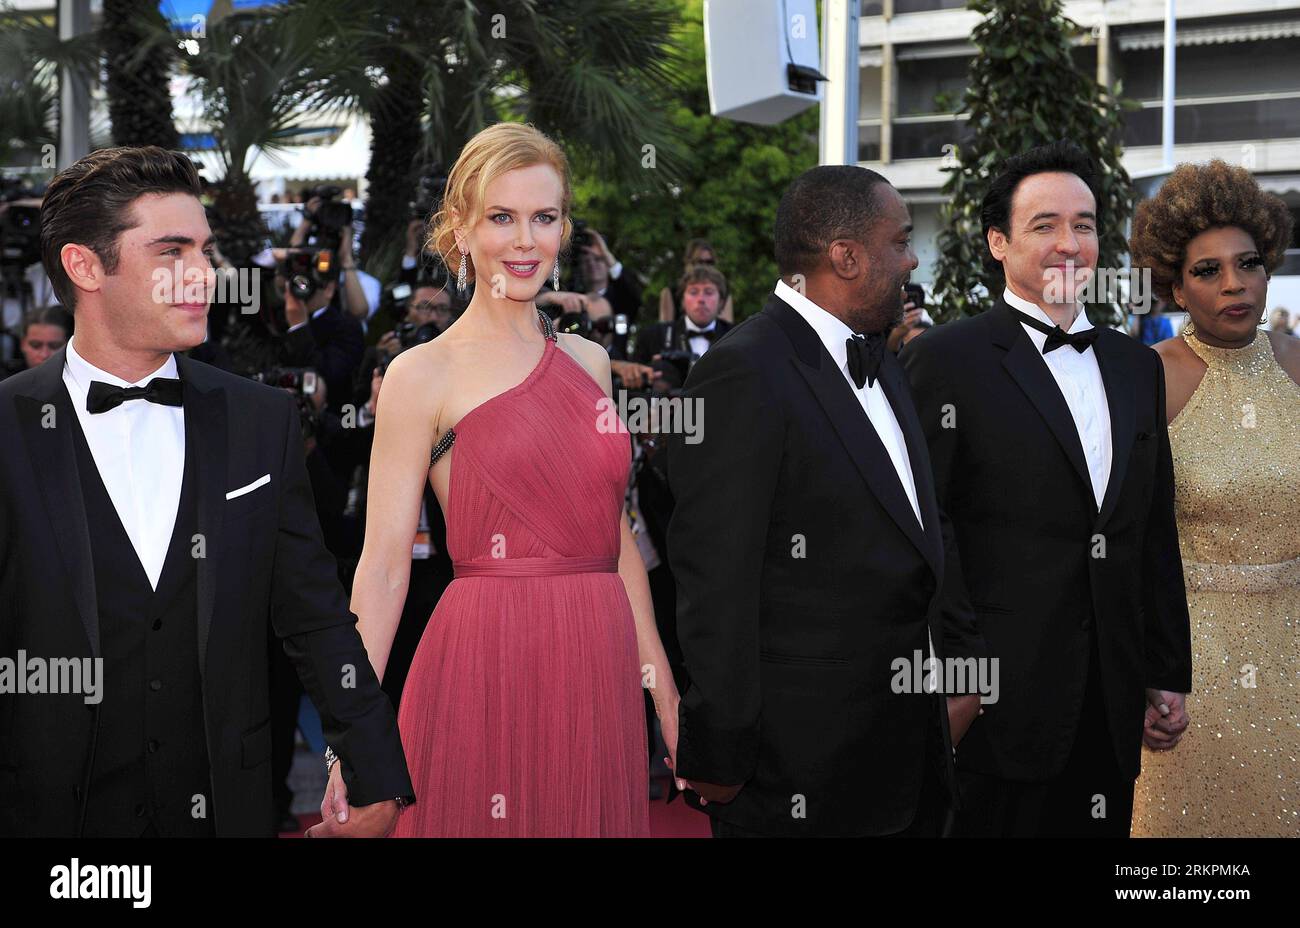 Bildnummer: 58027680  Datum: 24.05.2012  Copyright: imago/Xinhua (120524) -- CANNES, May 24, 2012 (Xinhua) -- (L to R) Cast members of The Paperboy , U.S. actor Zac Efron, Australian actress Nicole Kidman, U.S. director Lee Daniels, U.S. actor John Cusack and U.S. actress Macy Gray arrive for its premiere at the 65th Cannes Film Festival in Cannes, southern France, May 24, 2012. (Xinhua/Ye Pingfan) FRANCE-CANNES-FILM FESTIVAL-PREMIERE-PAPERBOY PUBLICATIONxNOTxINxCHN Kultur Entertainment People Film 65. Internationale Filmfestspiele Cannes Filmpremiere Premiere x0x xub 2012 quer premiumd      5 Stock Photo